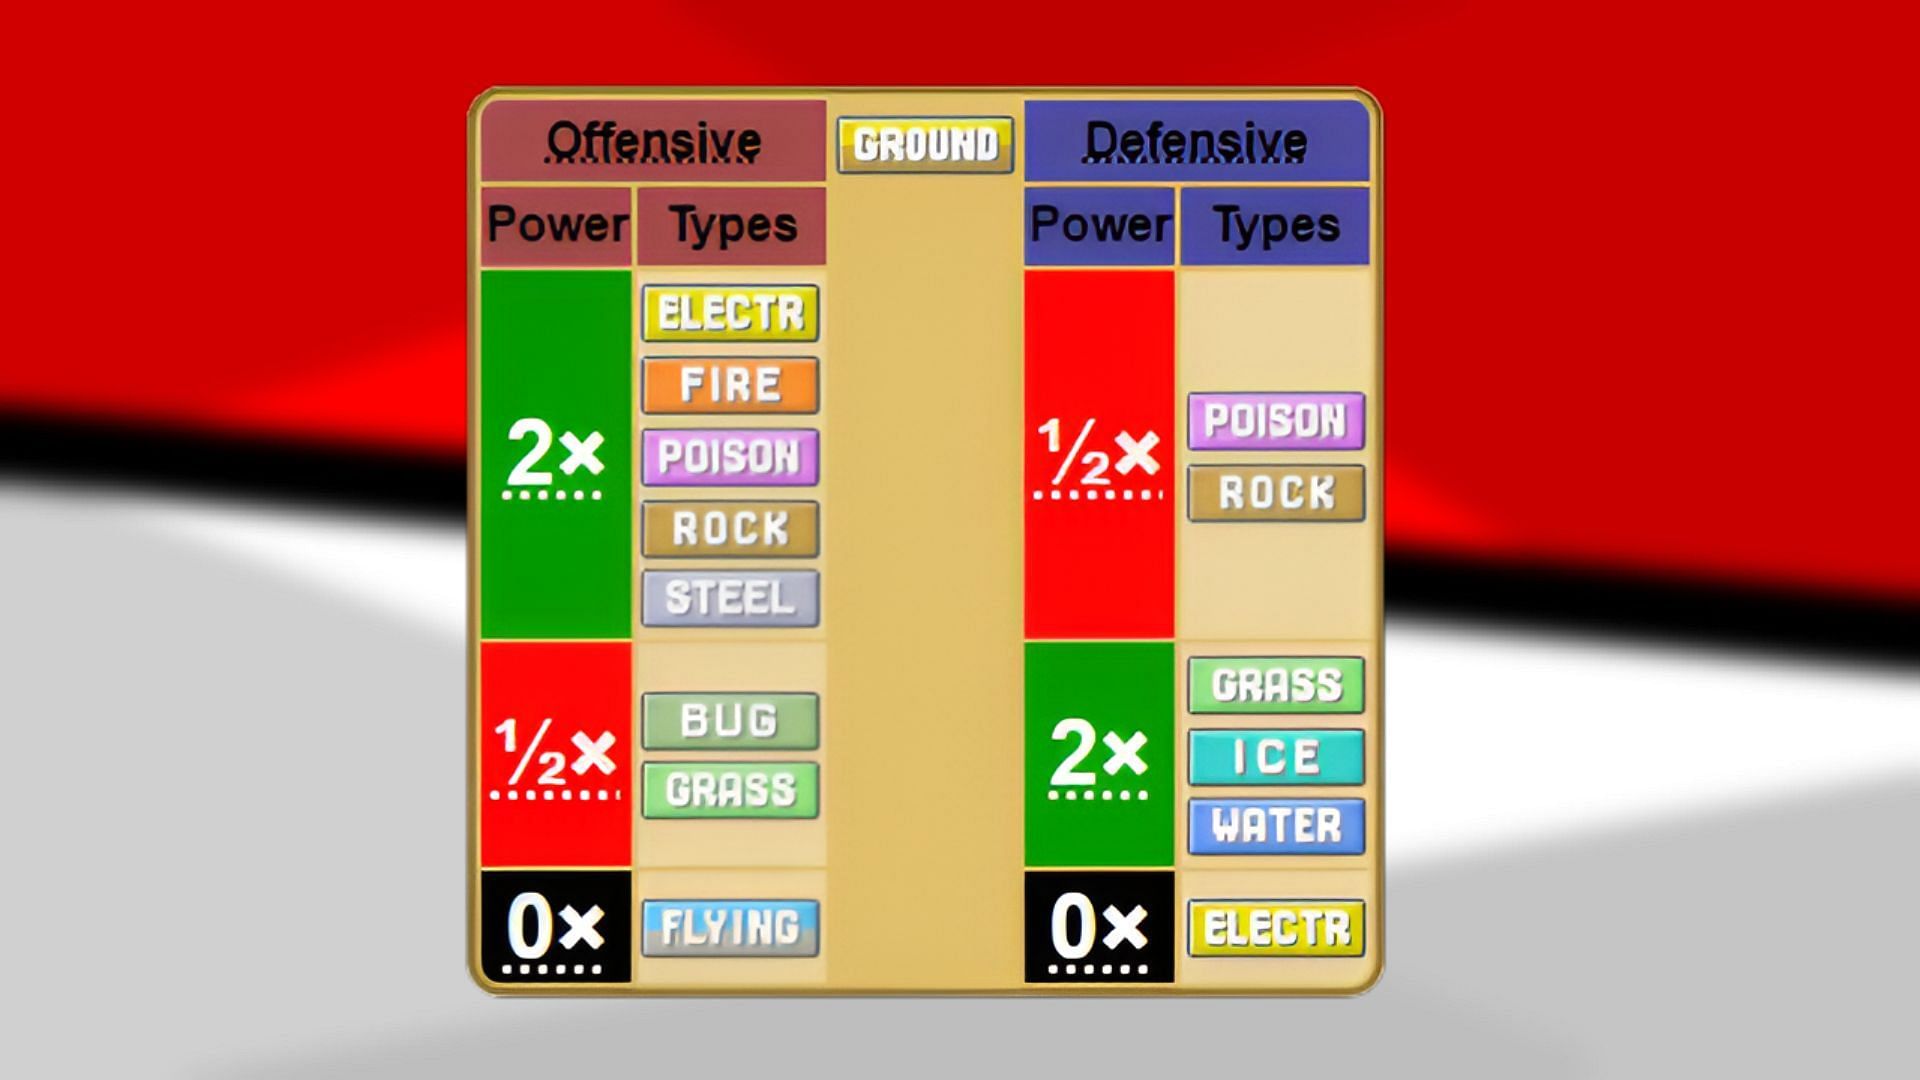 Pokemon Scarlet and Violet Type Chart: Strengths, Weaknesses